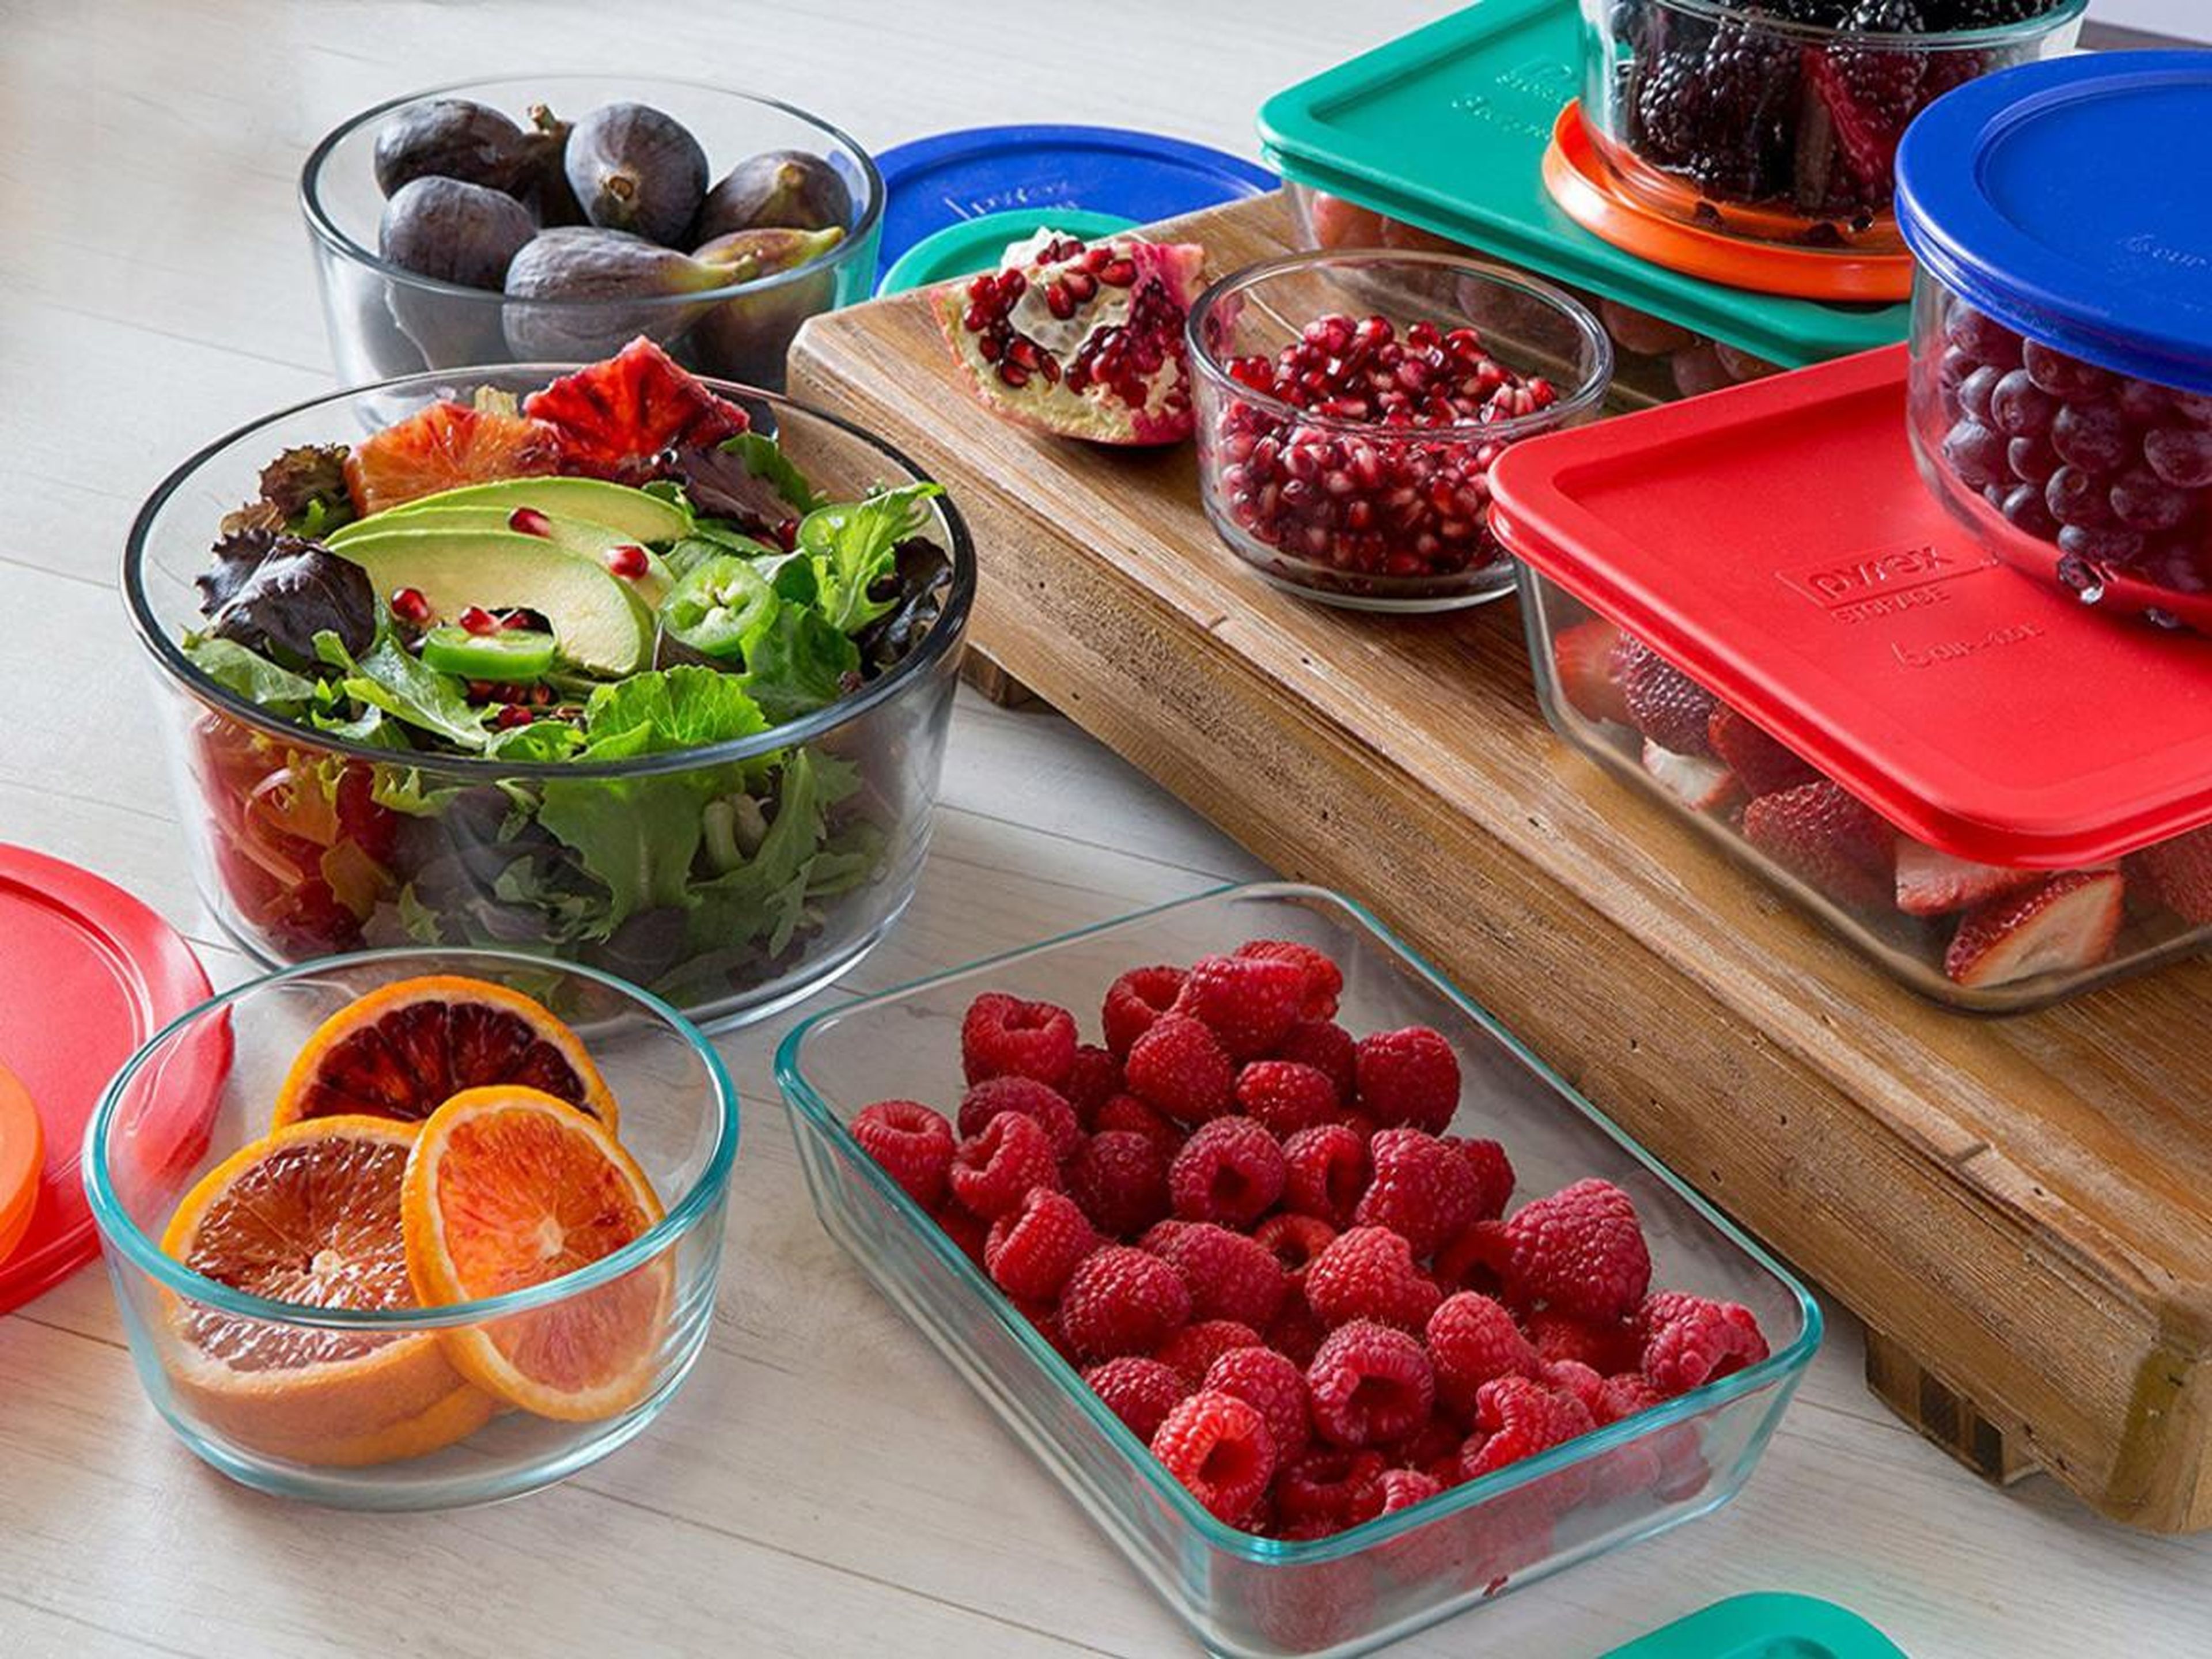 Glass food storage containers